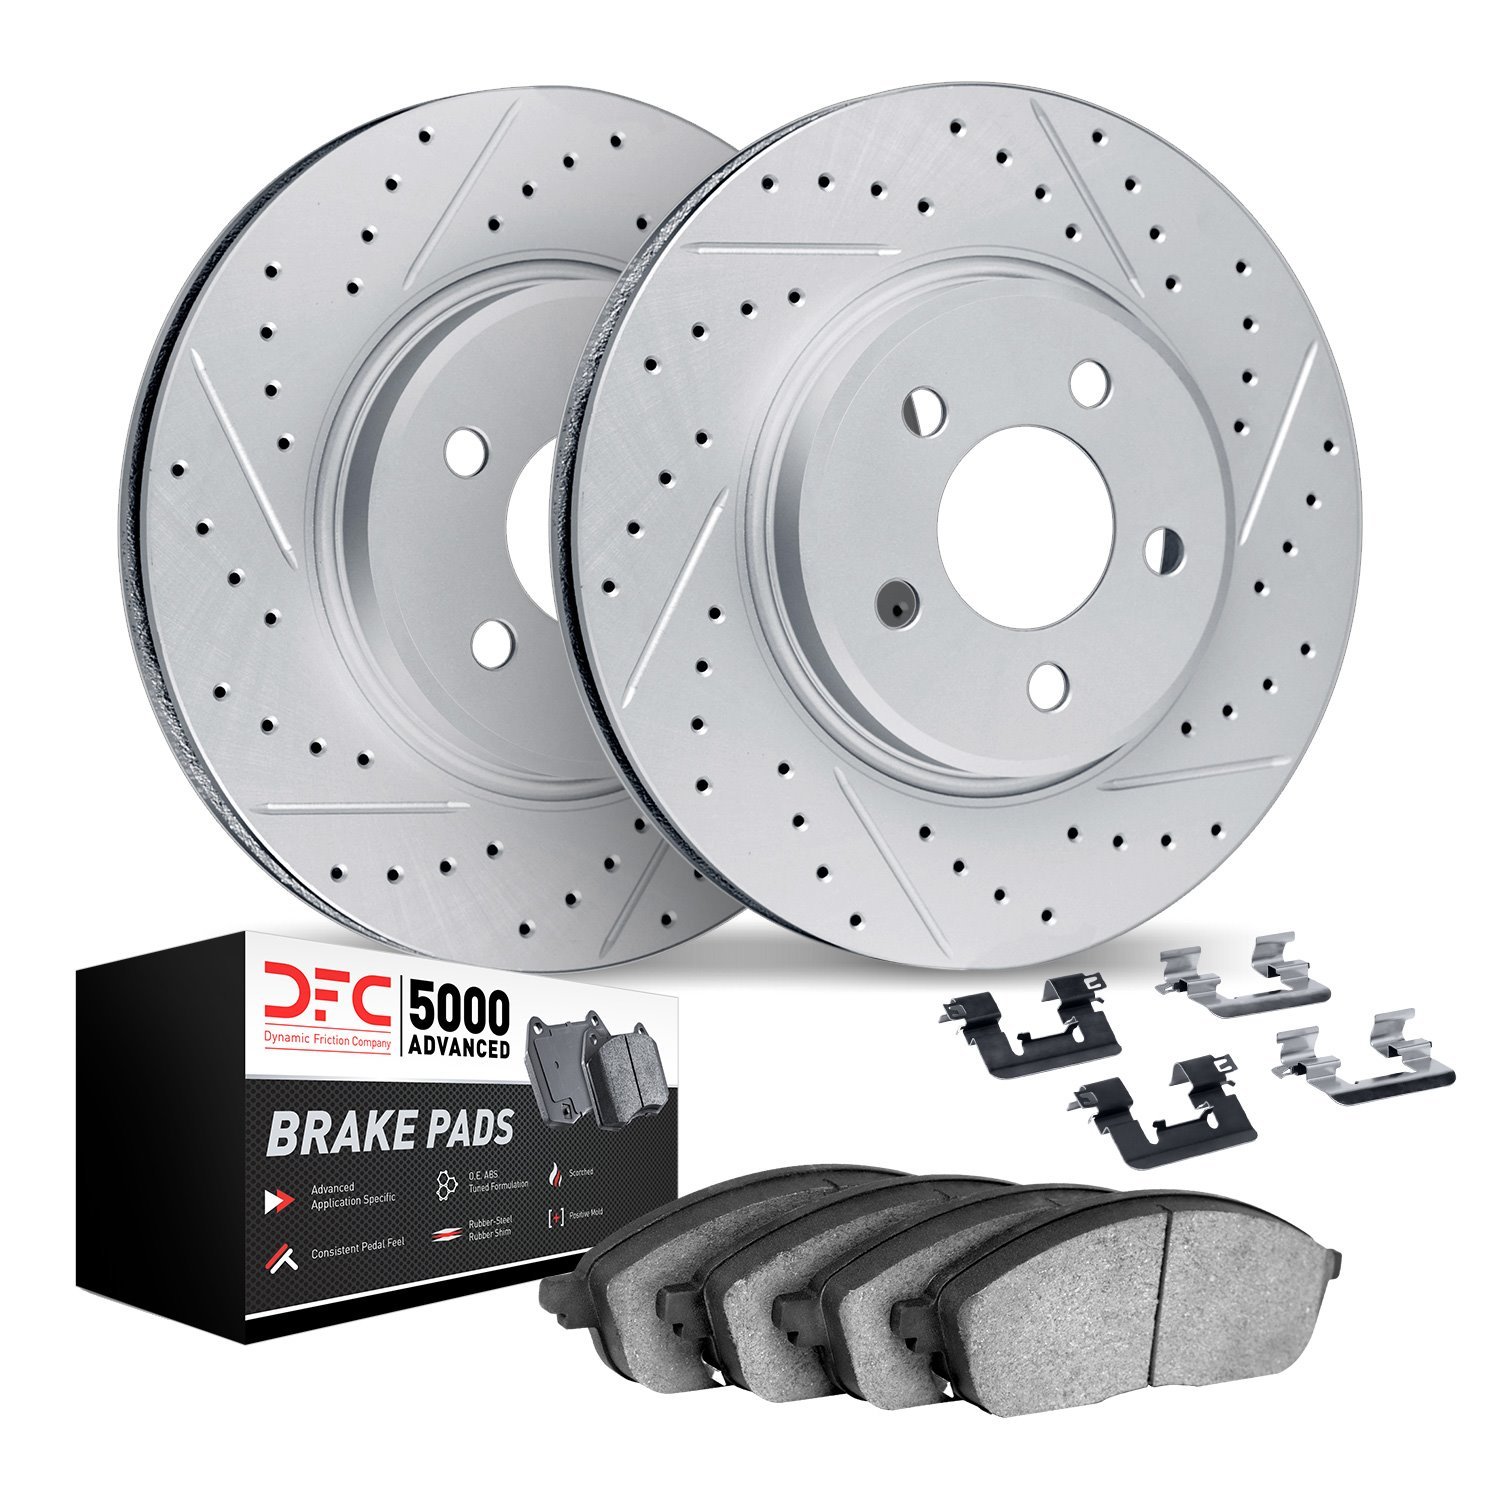 2512-63046 Geoperformance Drilled/Slotted Rotors w/5000 Advanced Brake Pads Kit & Hardware, 2013-2019 Mercedes-Benz, Position: R